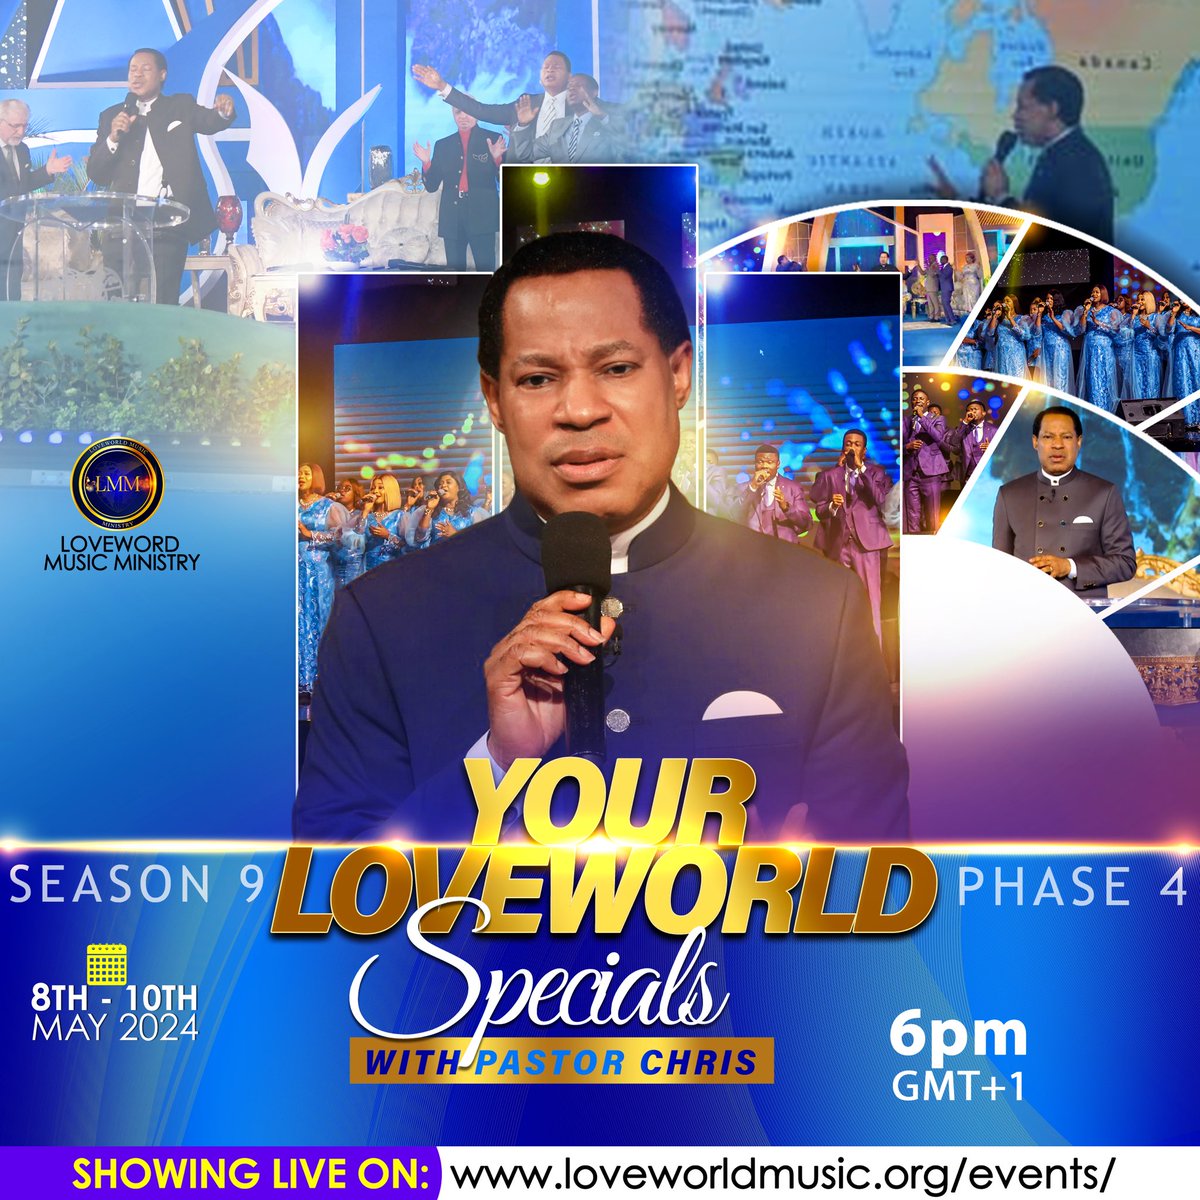 💥 BREAKING NEWS💥
YOUR LOVEWORLD SPECIALS Season 9 Phase 4 with Pastor Chris starts at 6️⃣ pm GMT+1 Showing live on 👉🏽 loveworldmusic.org/events/ 

Don't miss it!

#YLWS
#LMM
#PastorChrisLive